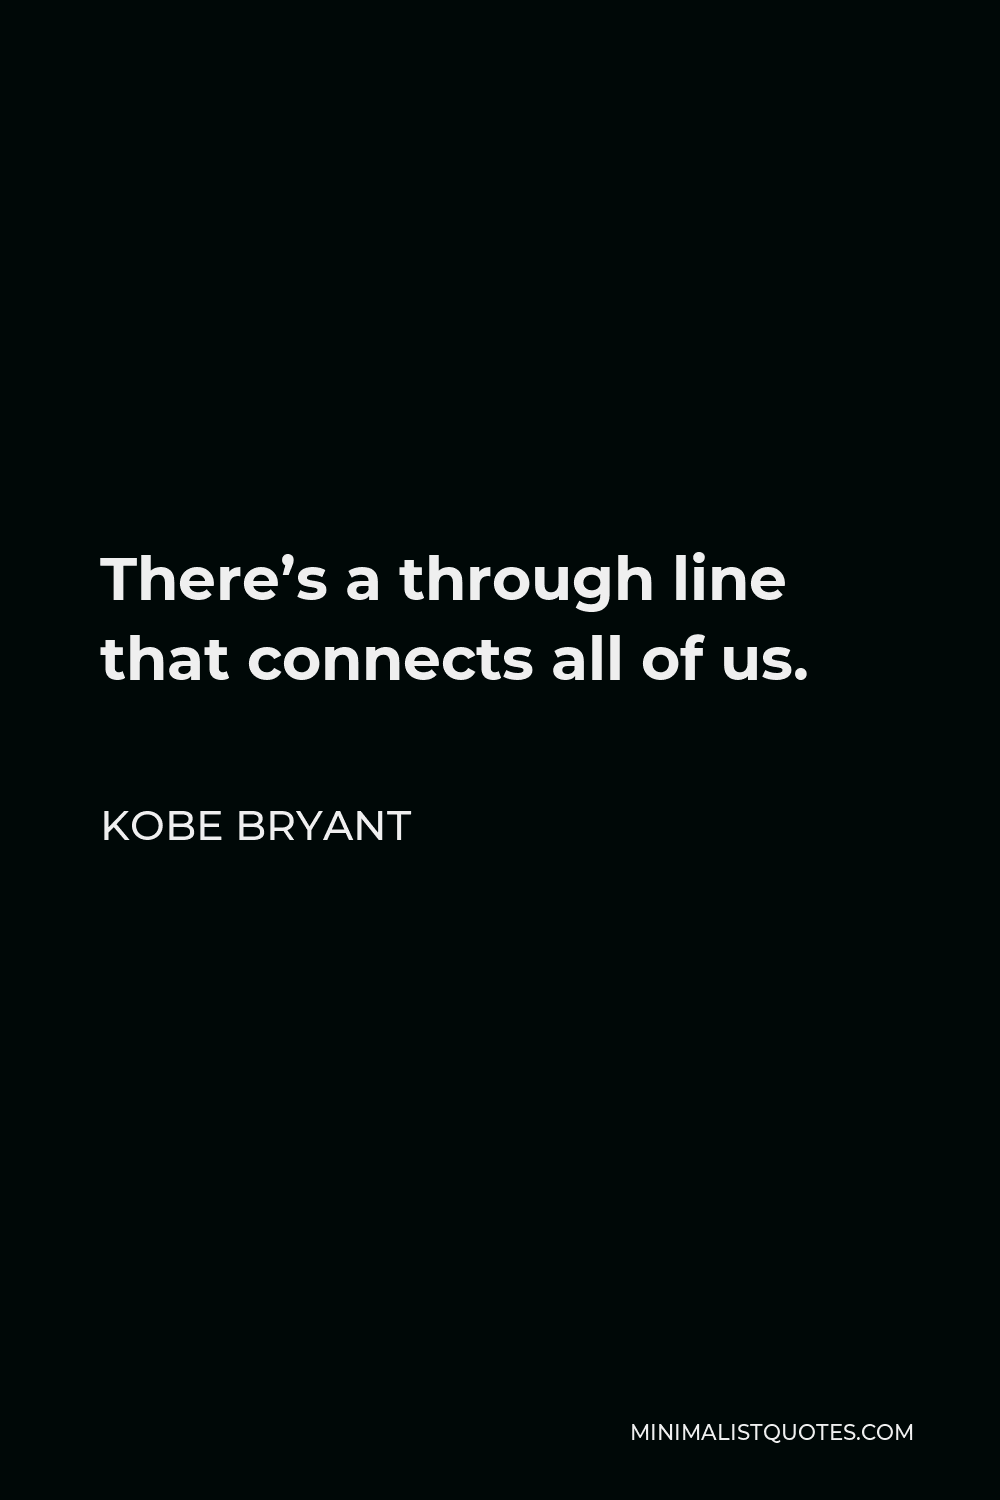 Kobe Bryant Quote - There’s a through line that connects all of us.